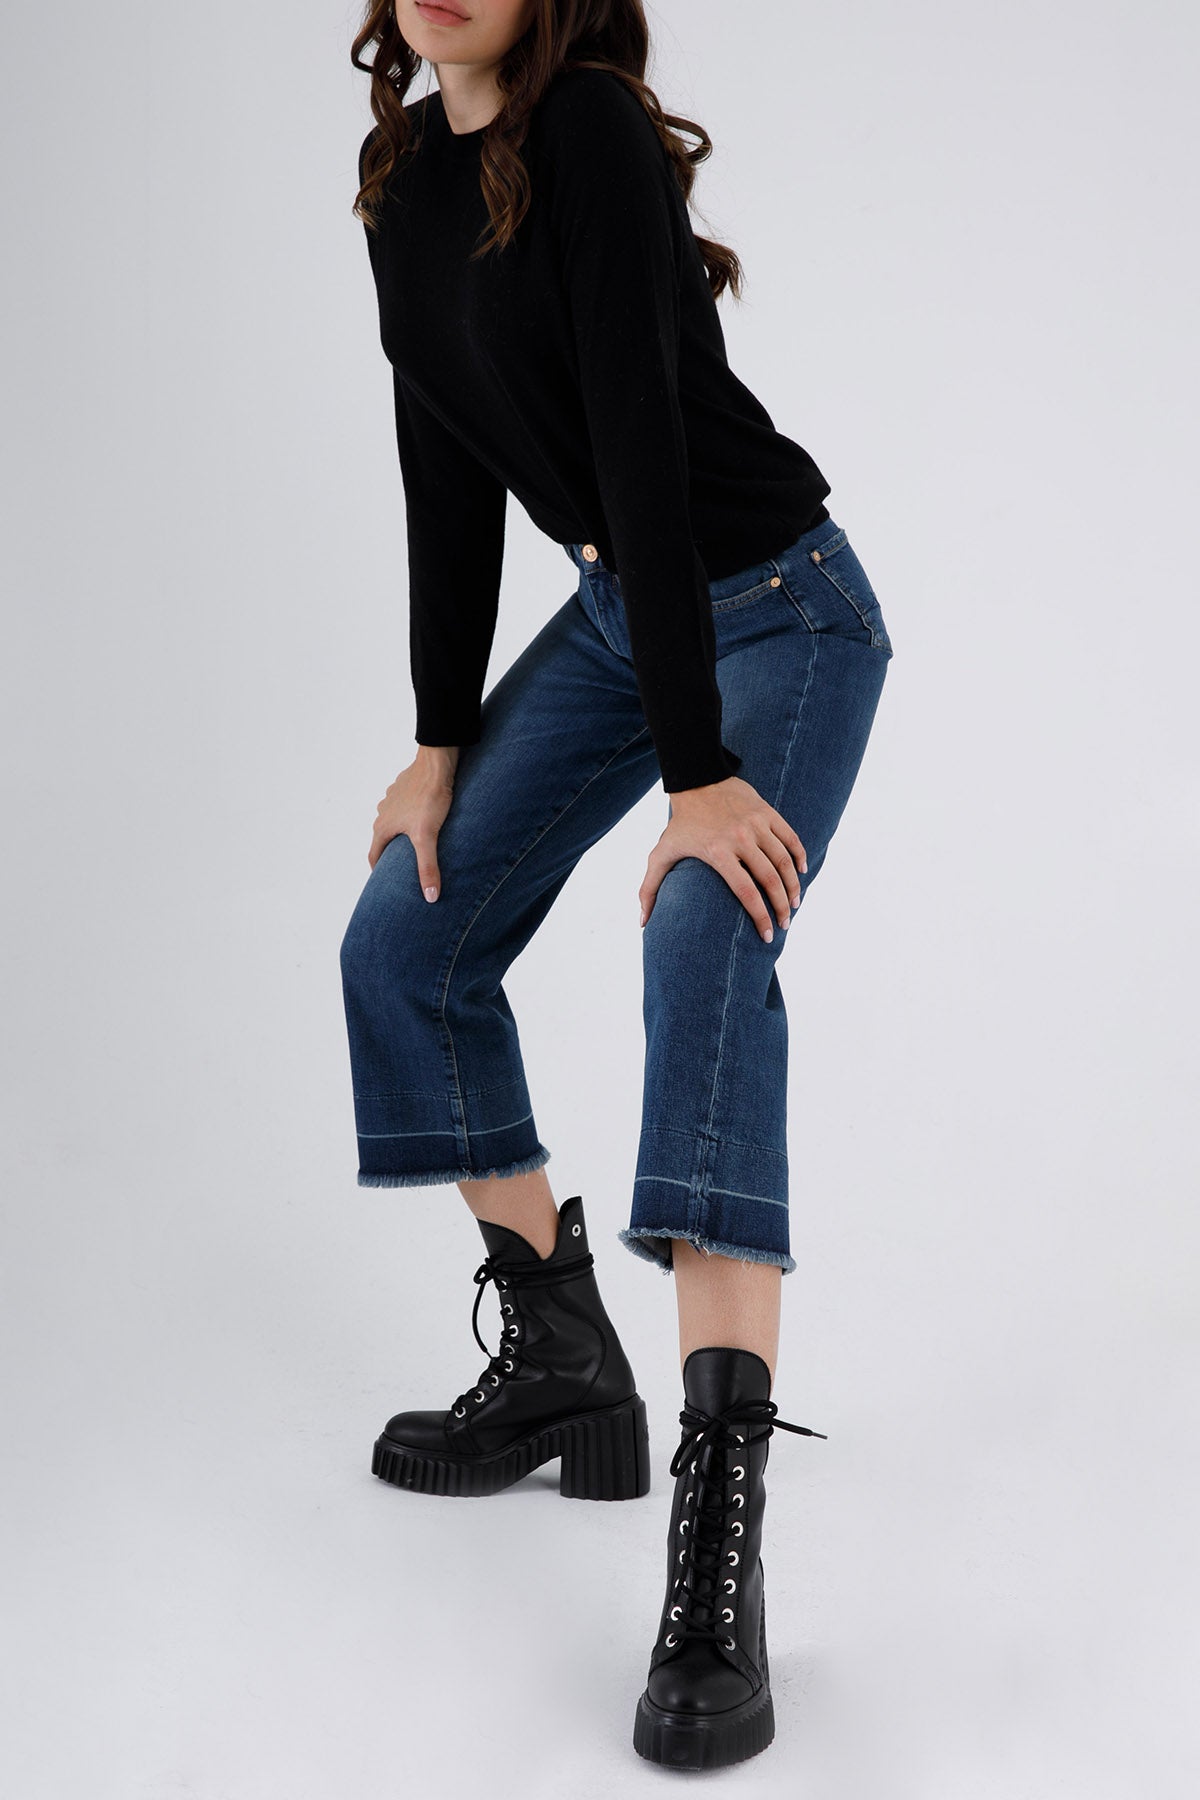 7 For All Mankind Alexa Cropped Streç Jeans-Libas Trendy Fashion Store